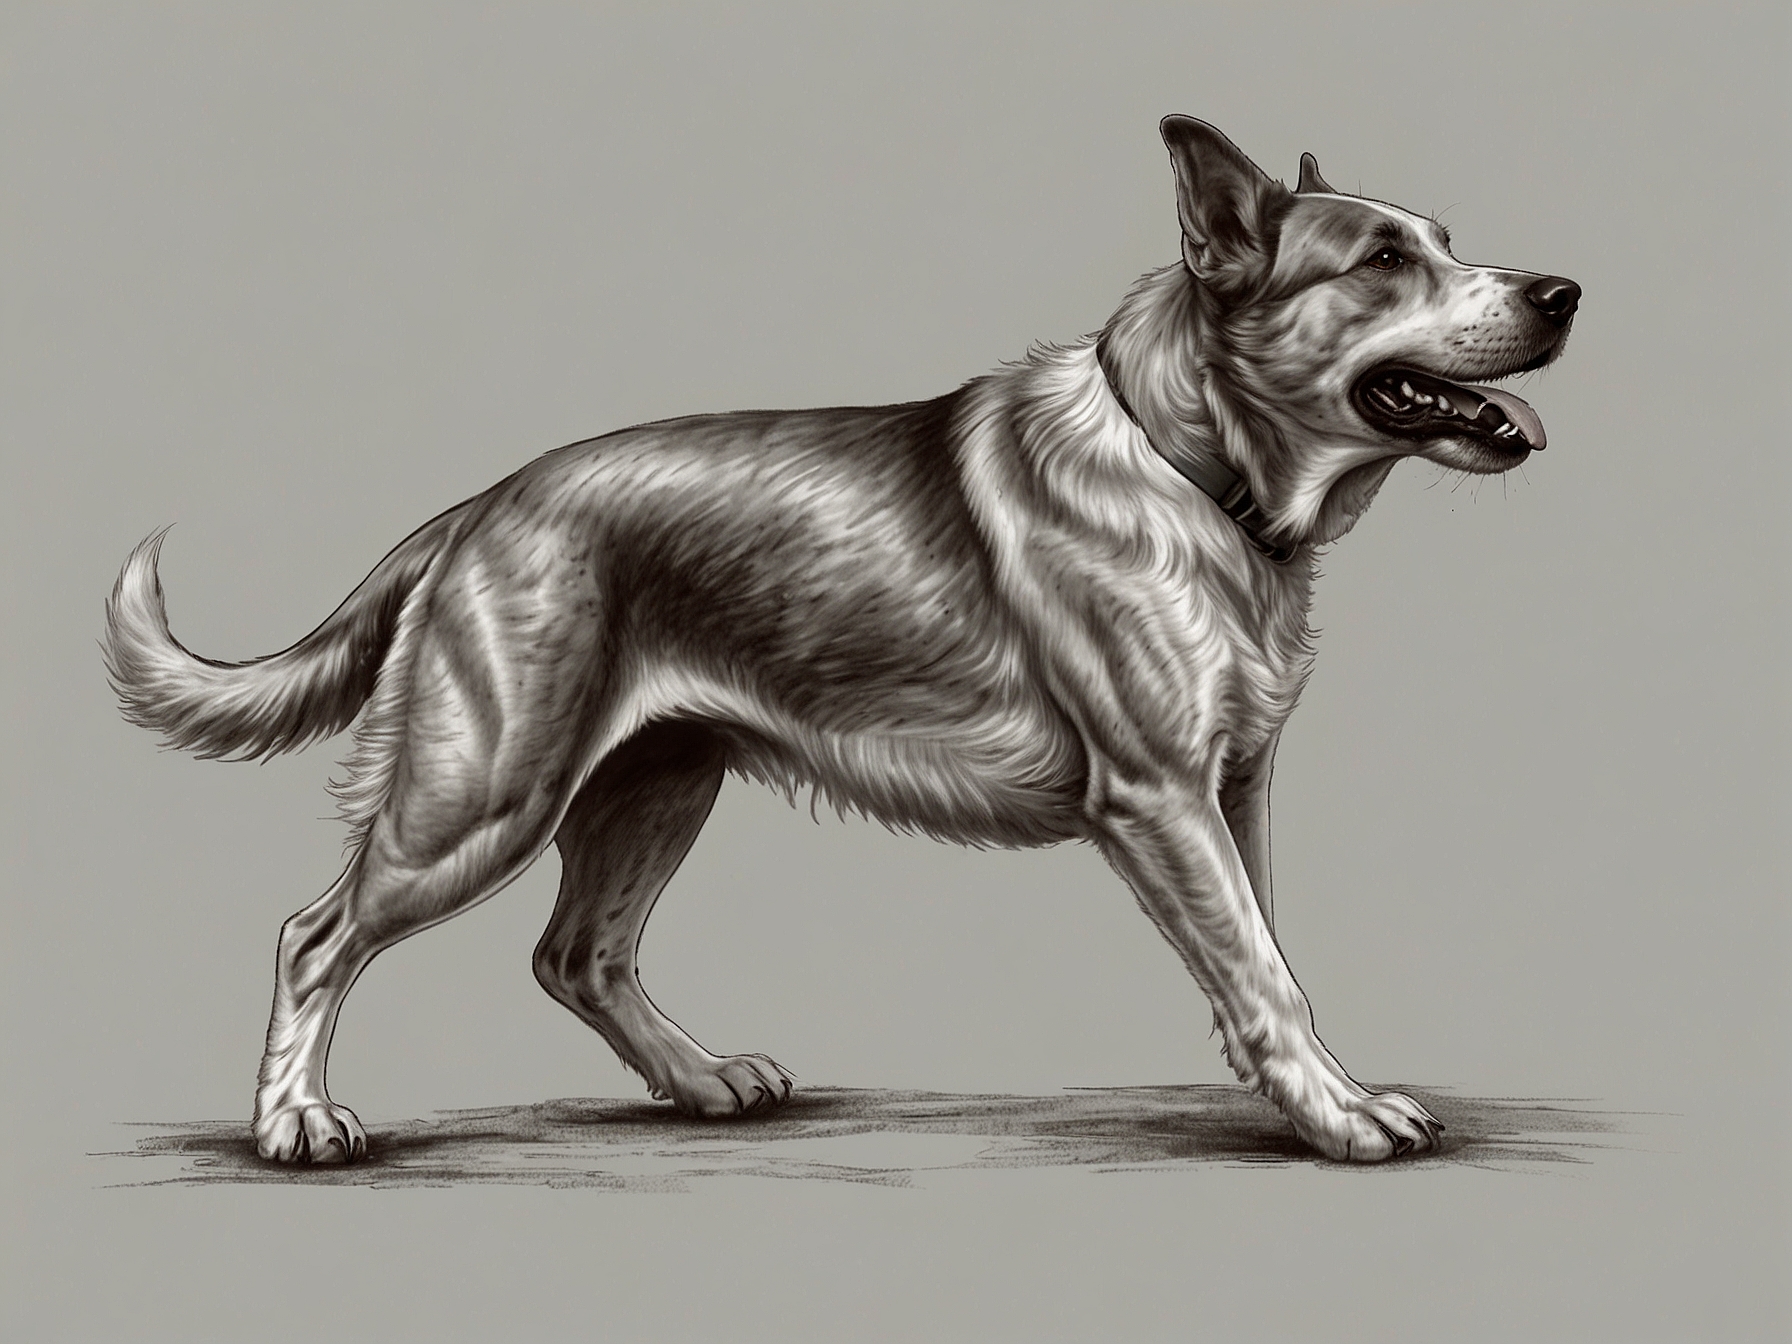 An image showing a dog limping, signaling potential leg or paw pain, indicating discomfort.